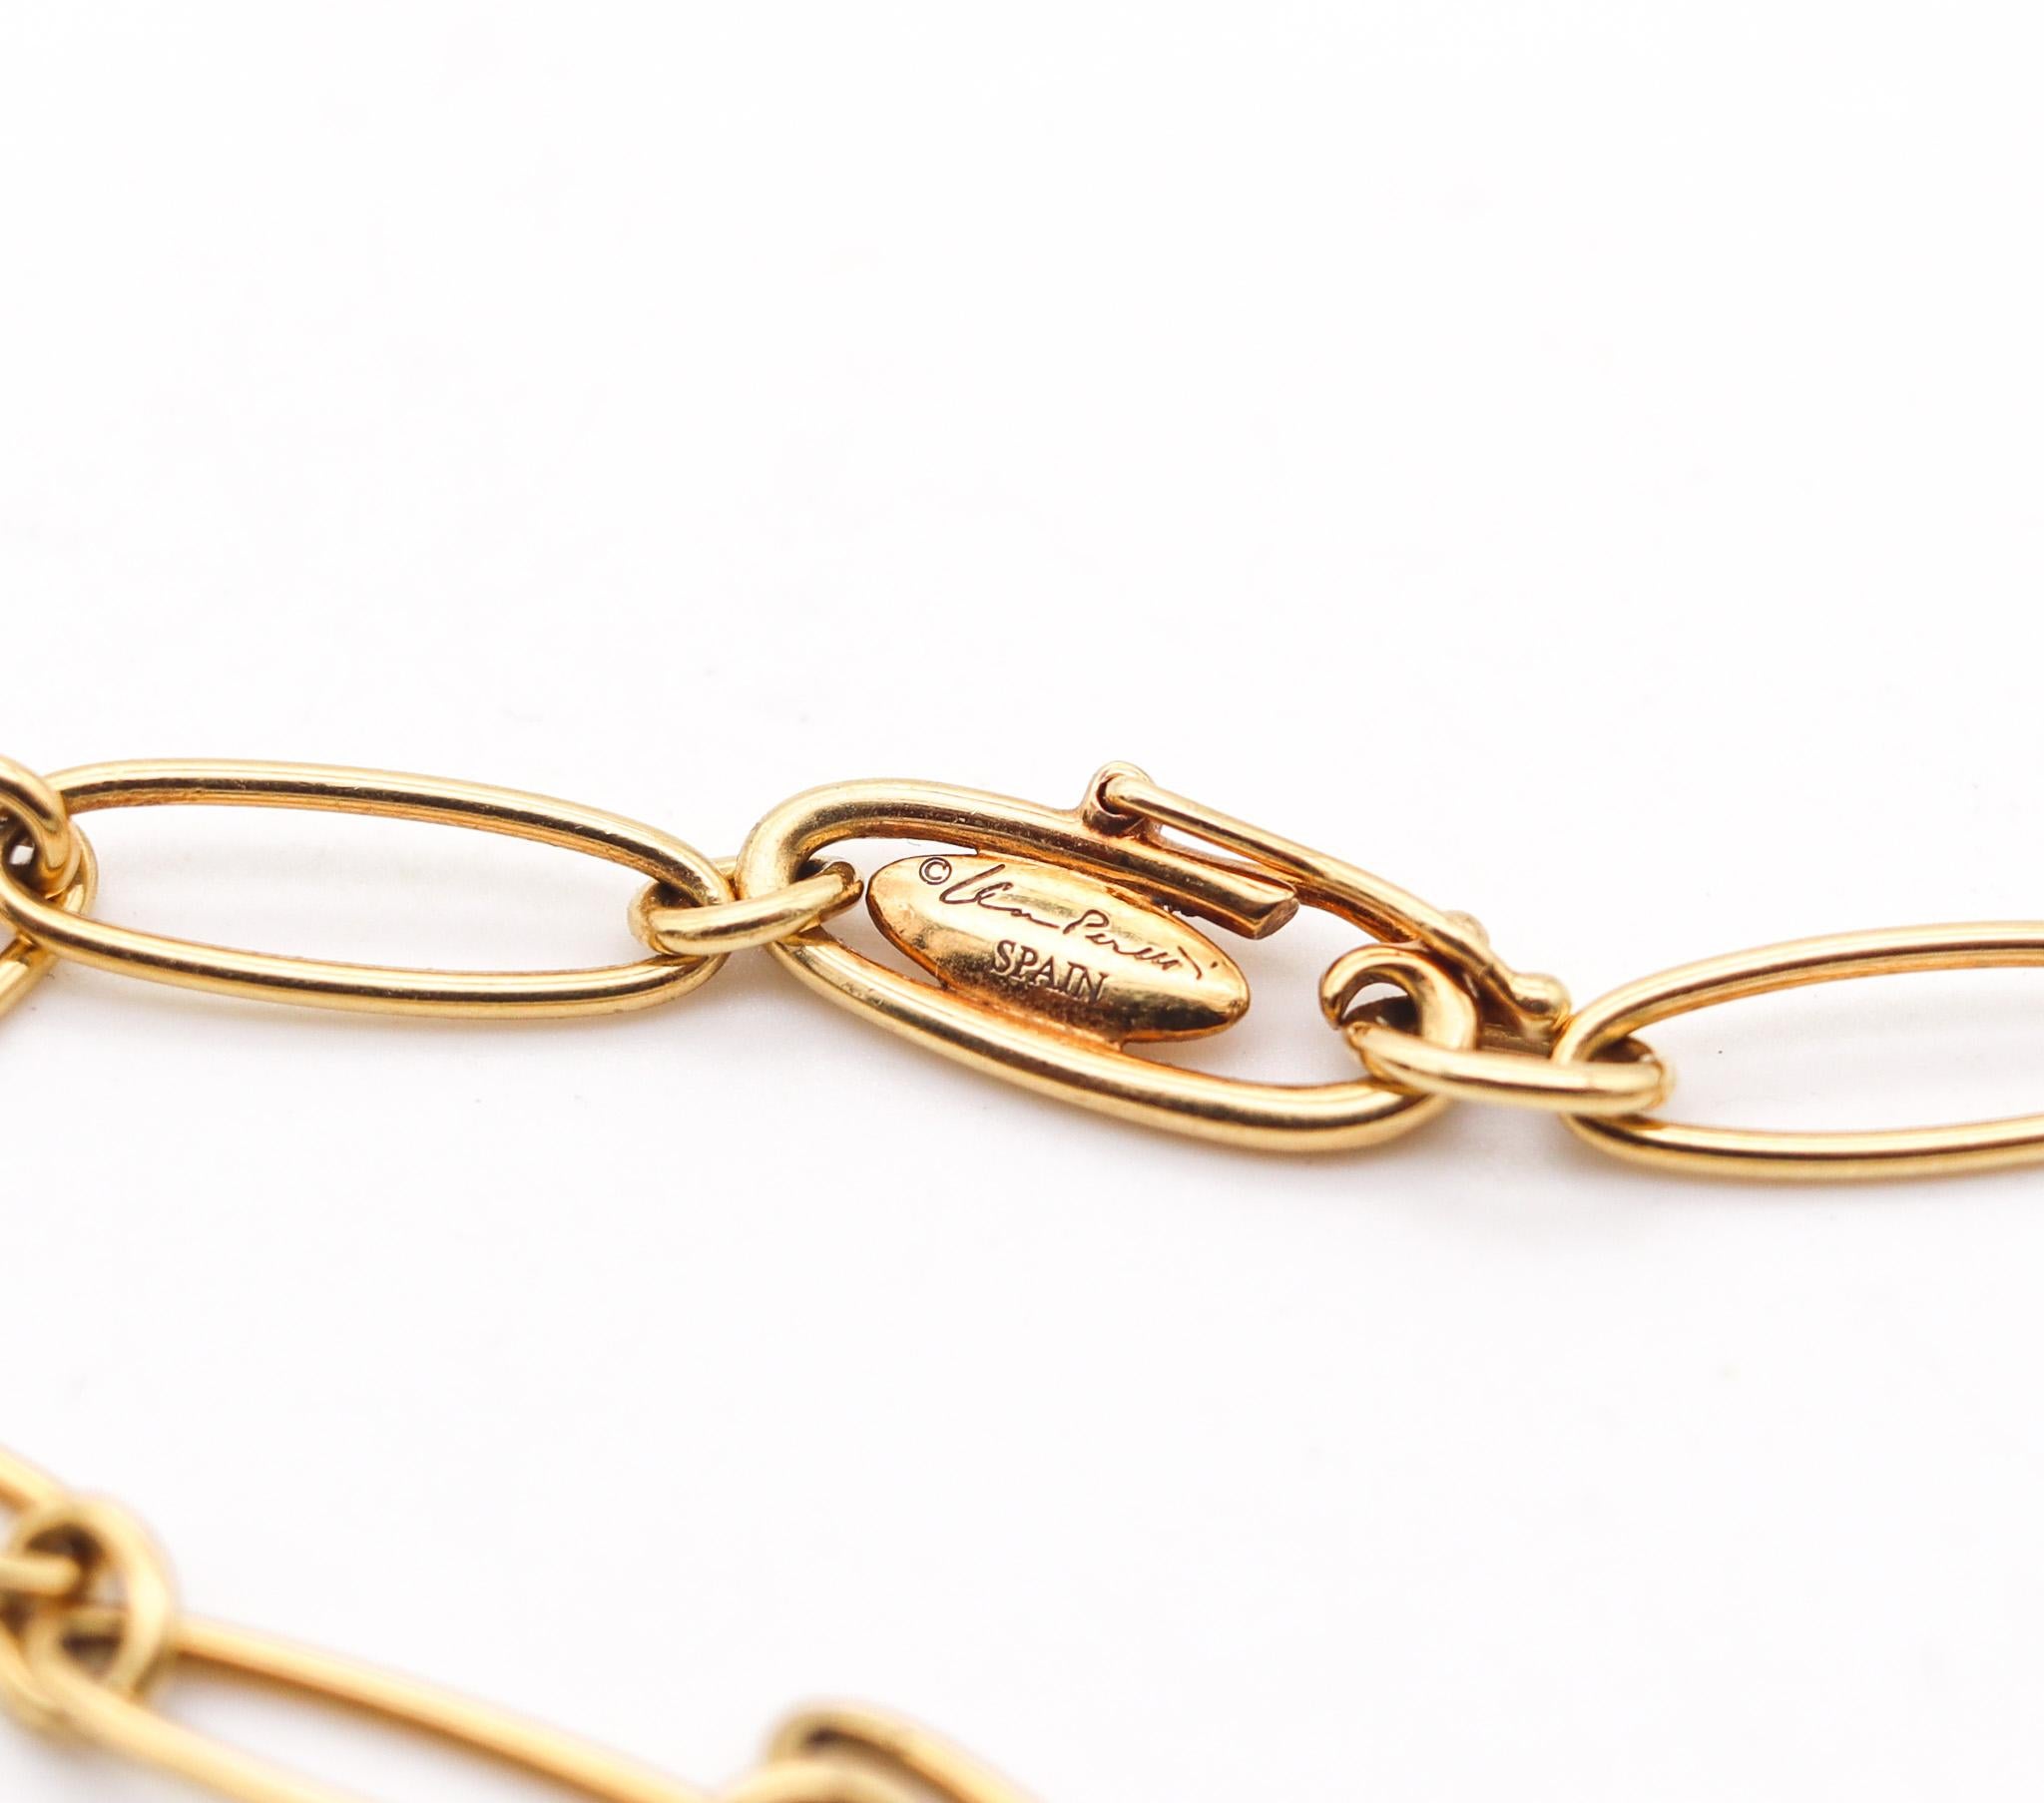 Tiffany & Co By Elsa Peretti Links Bracelet With Heart In Solid 18Kt Yellow Gold In Excellent Condition For Sale In Miami, FL